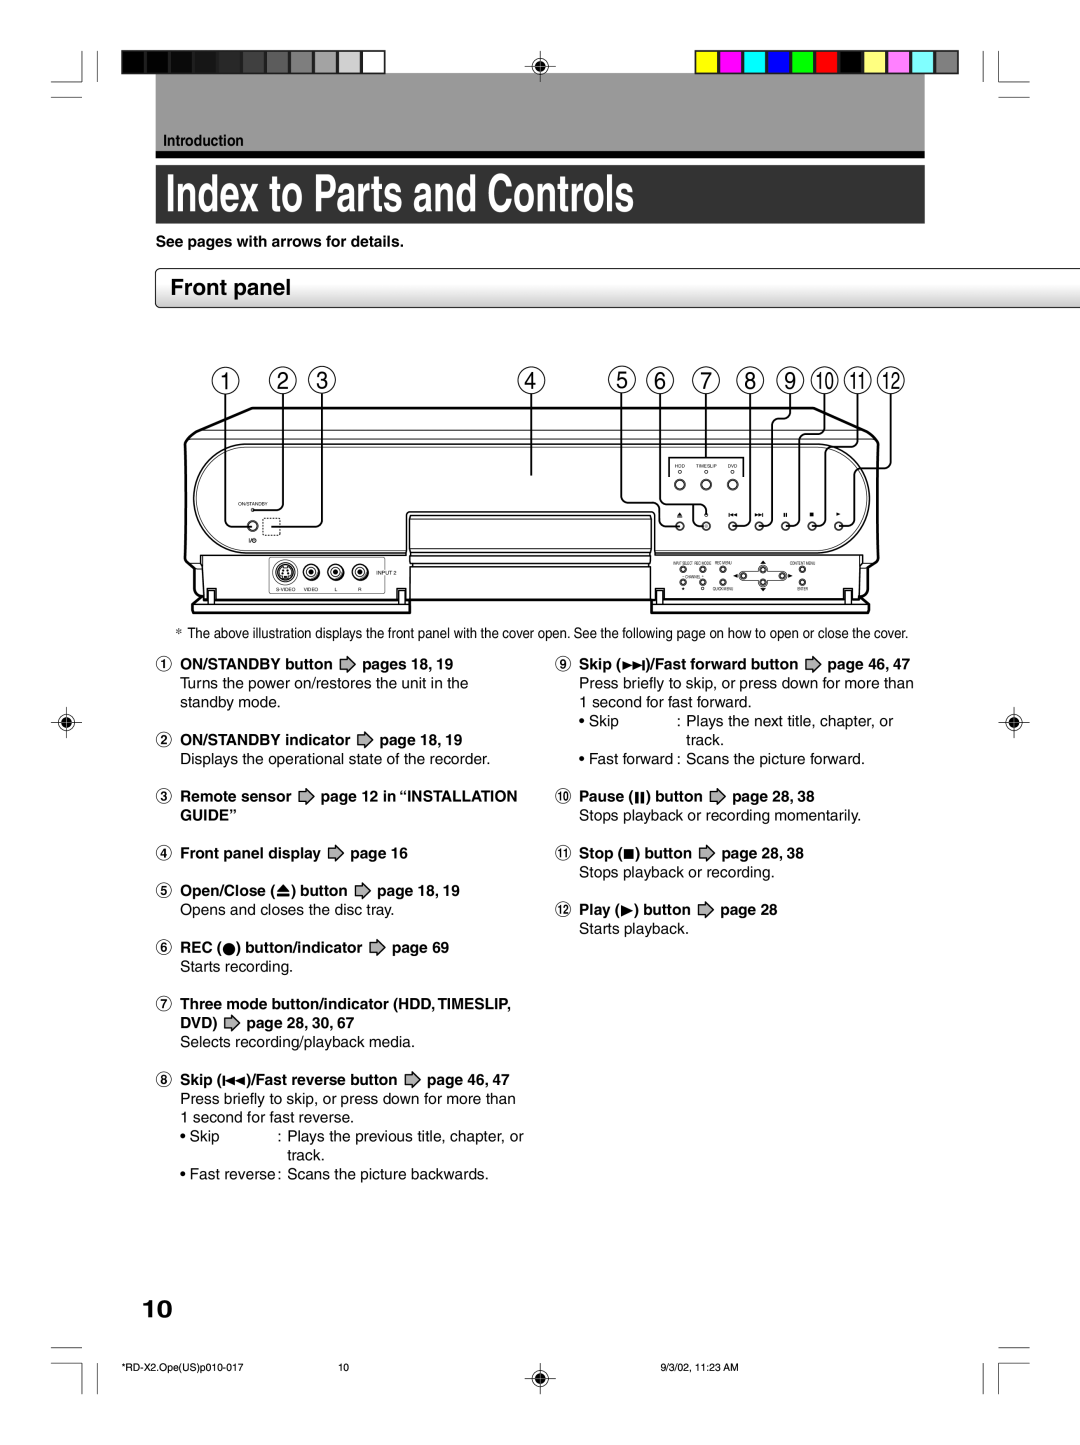 Toshiba RD-X2U owner manual Index to Parts and Controls, Front panel 